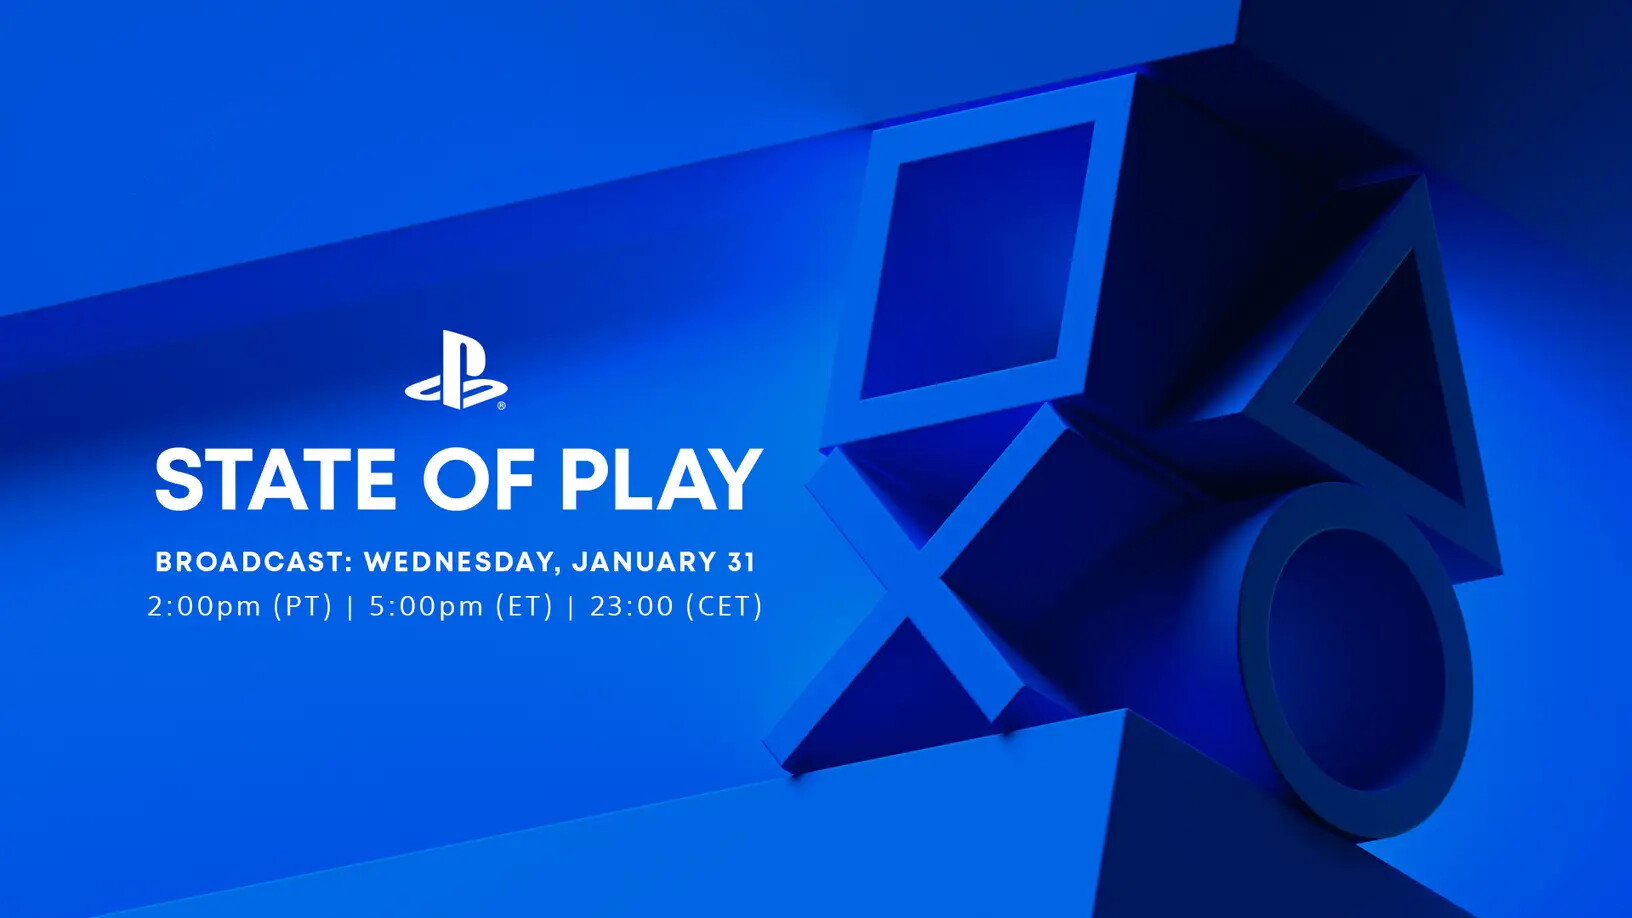 Sony’s PlayStation announces “State of Play” airing schedule for January 31.